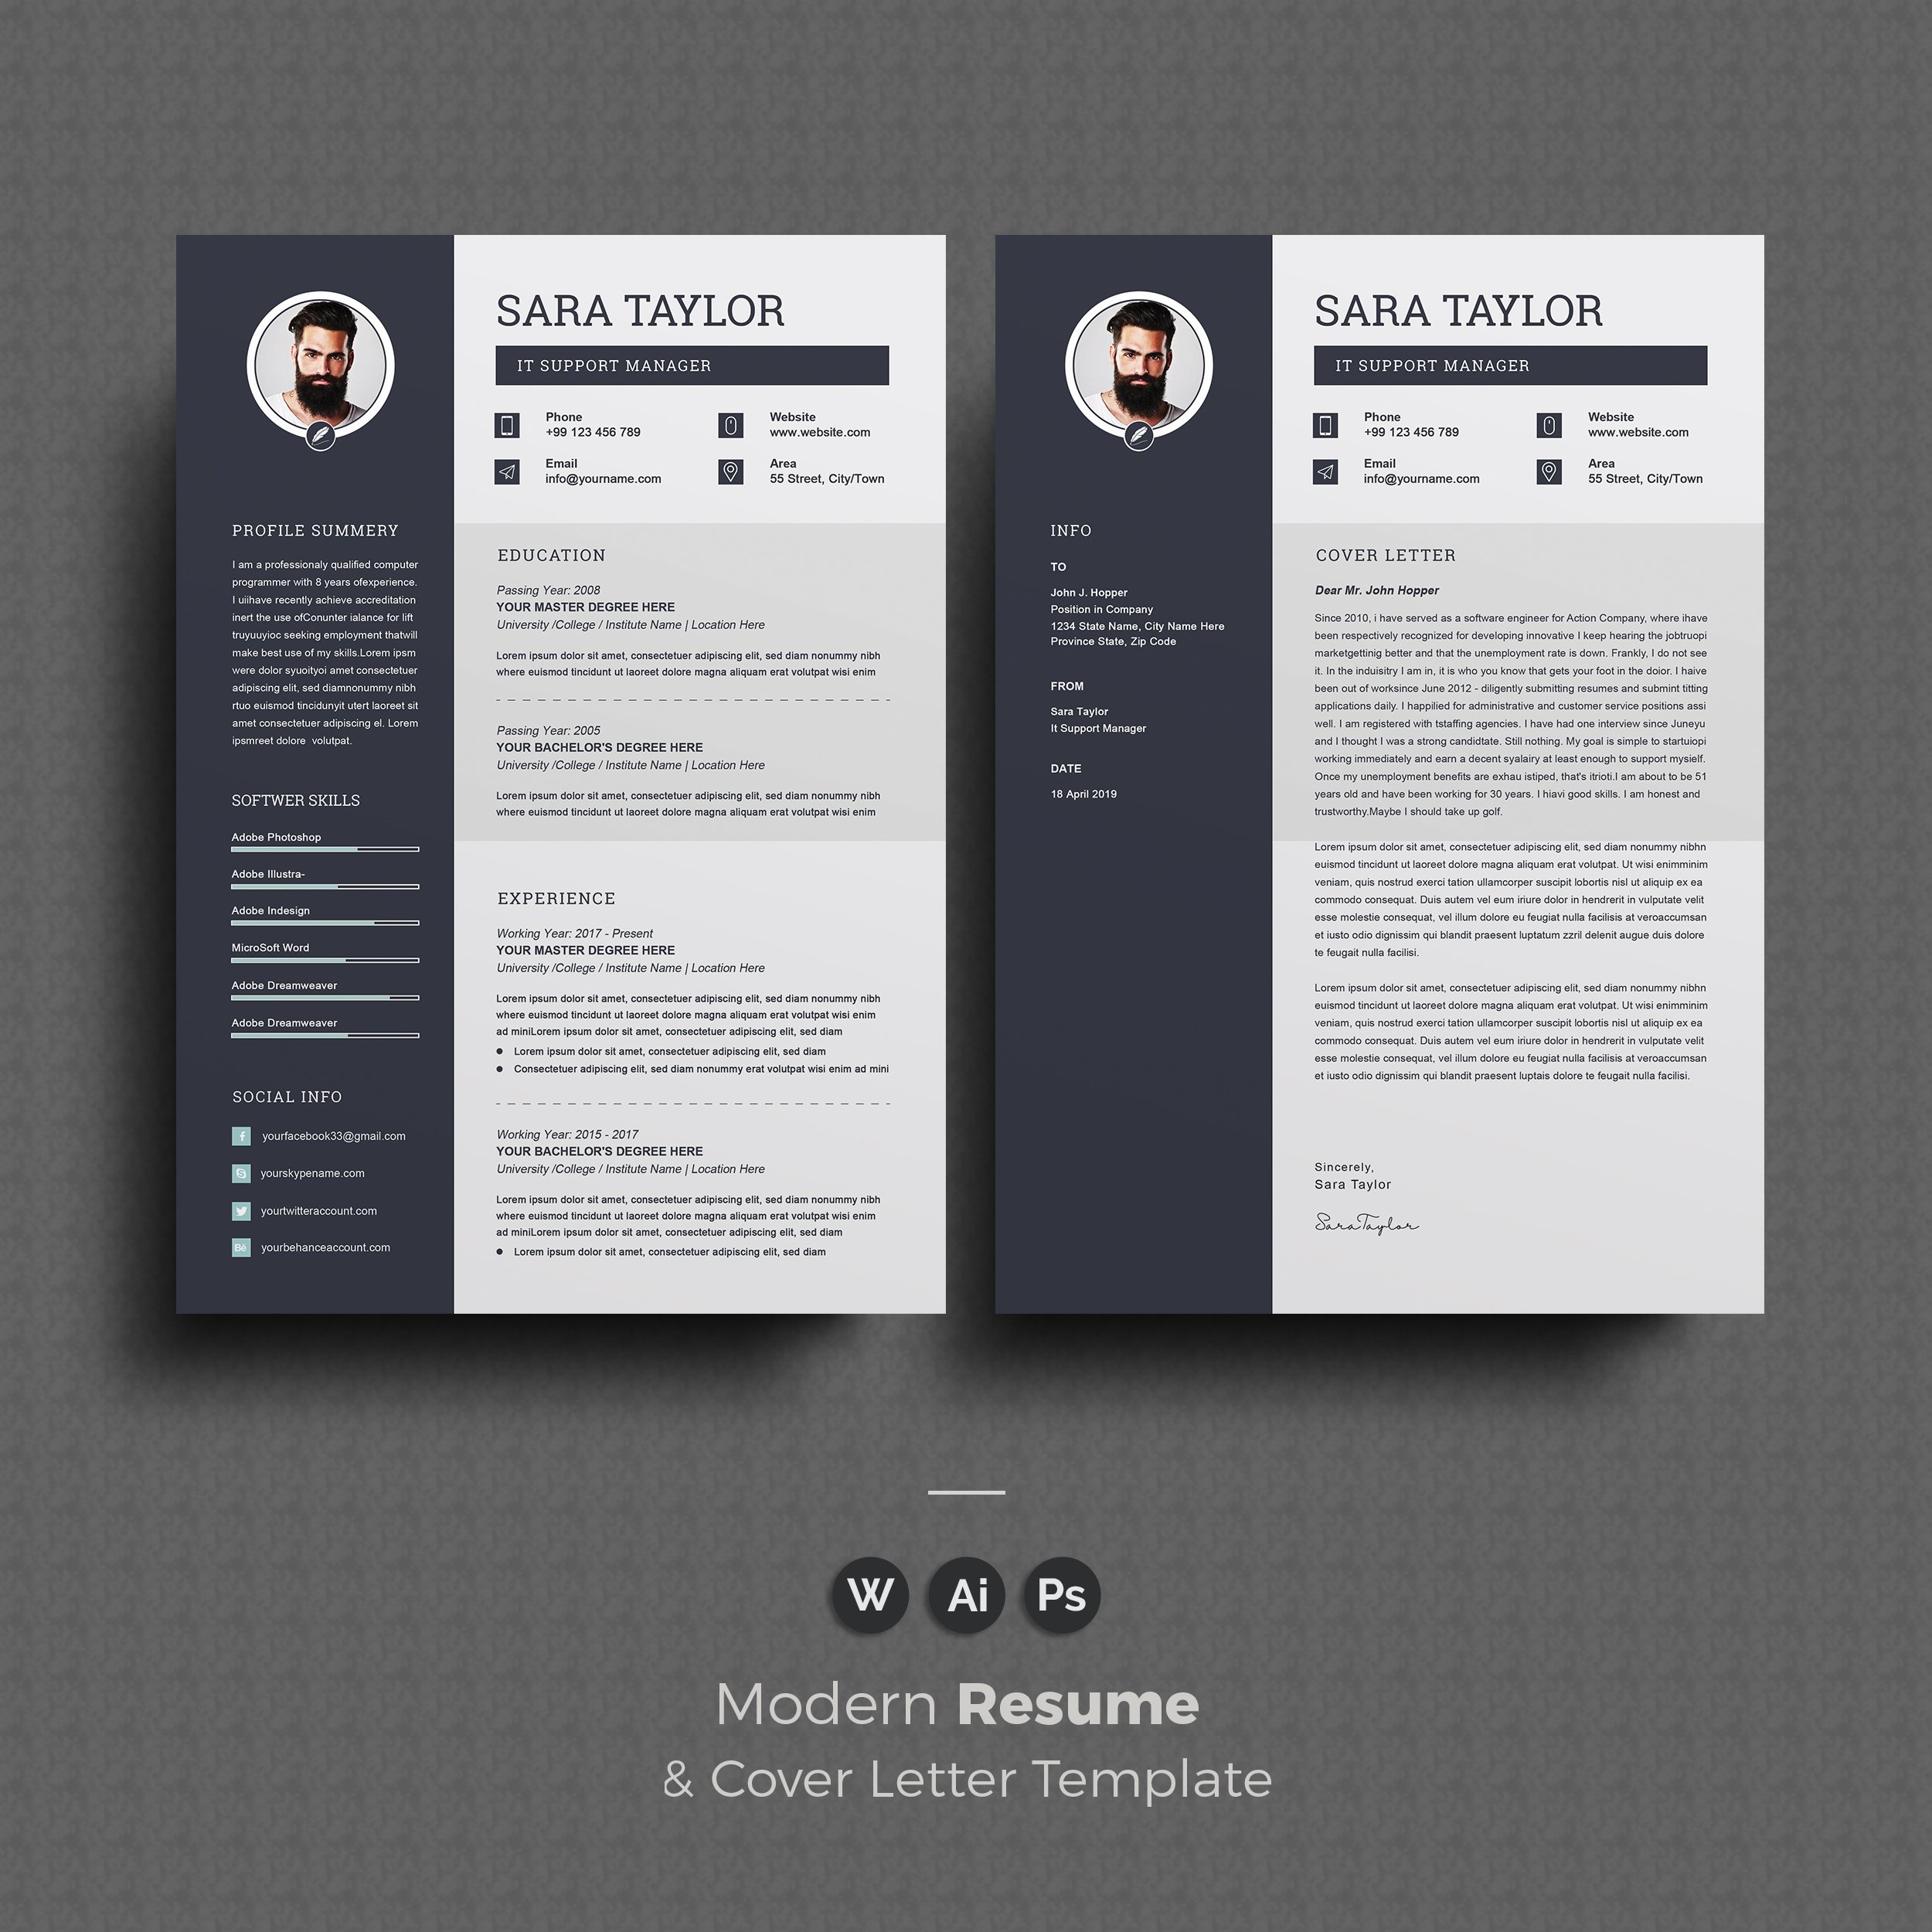 Professional resume template with a dark background.